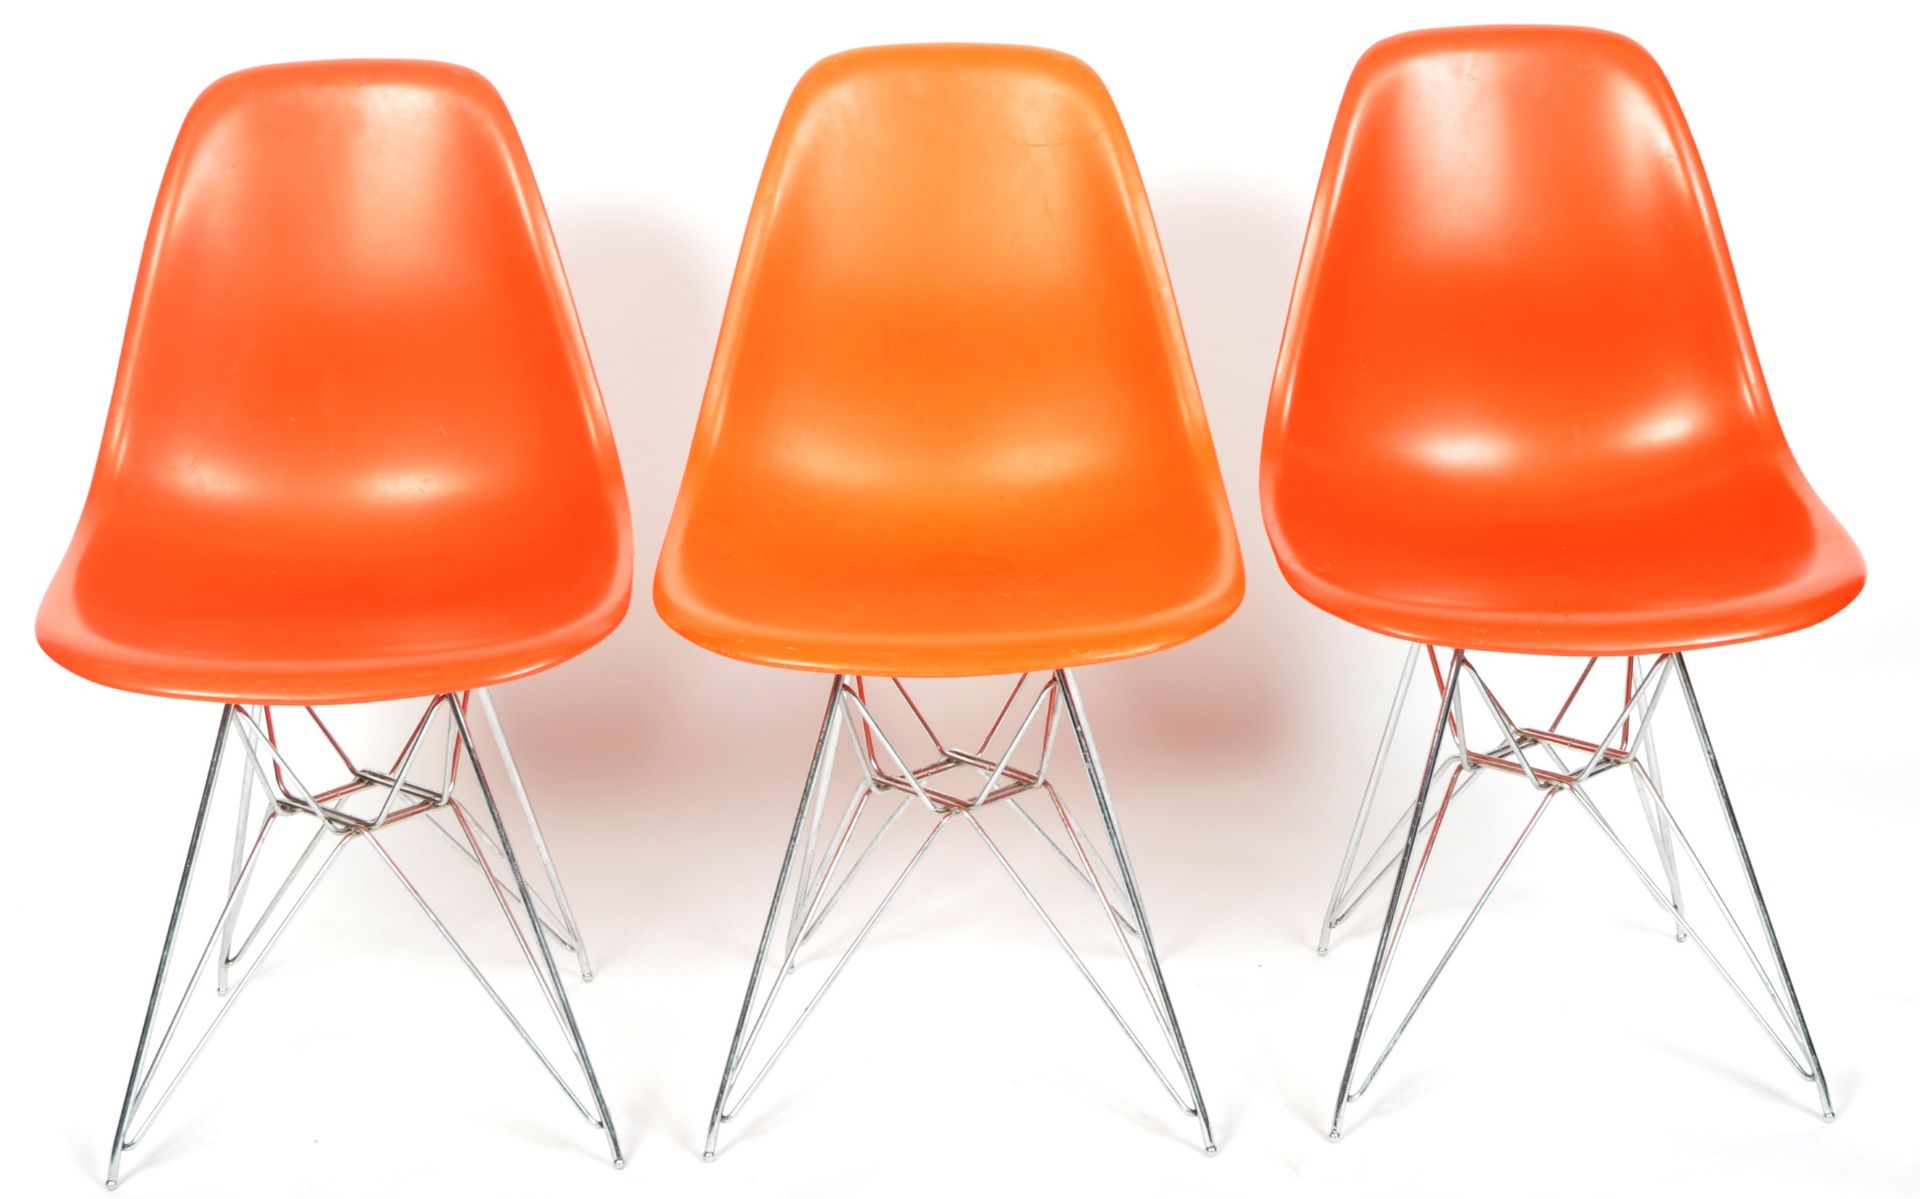 CHARLES & RAY EAMES FOR VITRA - SET OF SIX DSR EAMES PLASTIC CHAIRS - Image 4 of 10